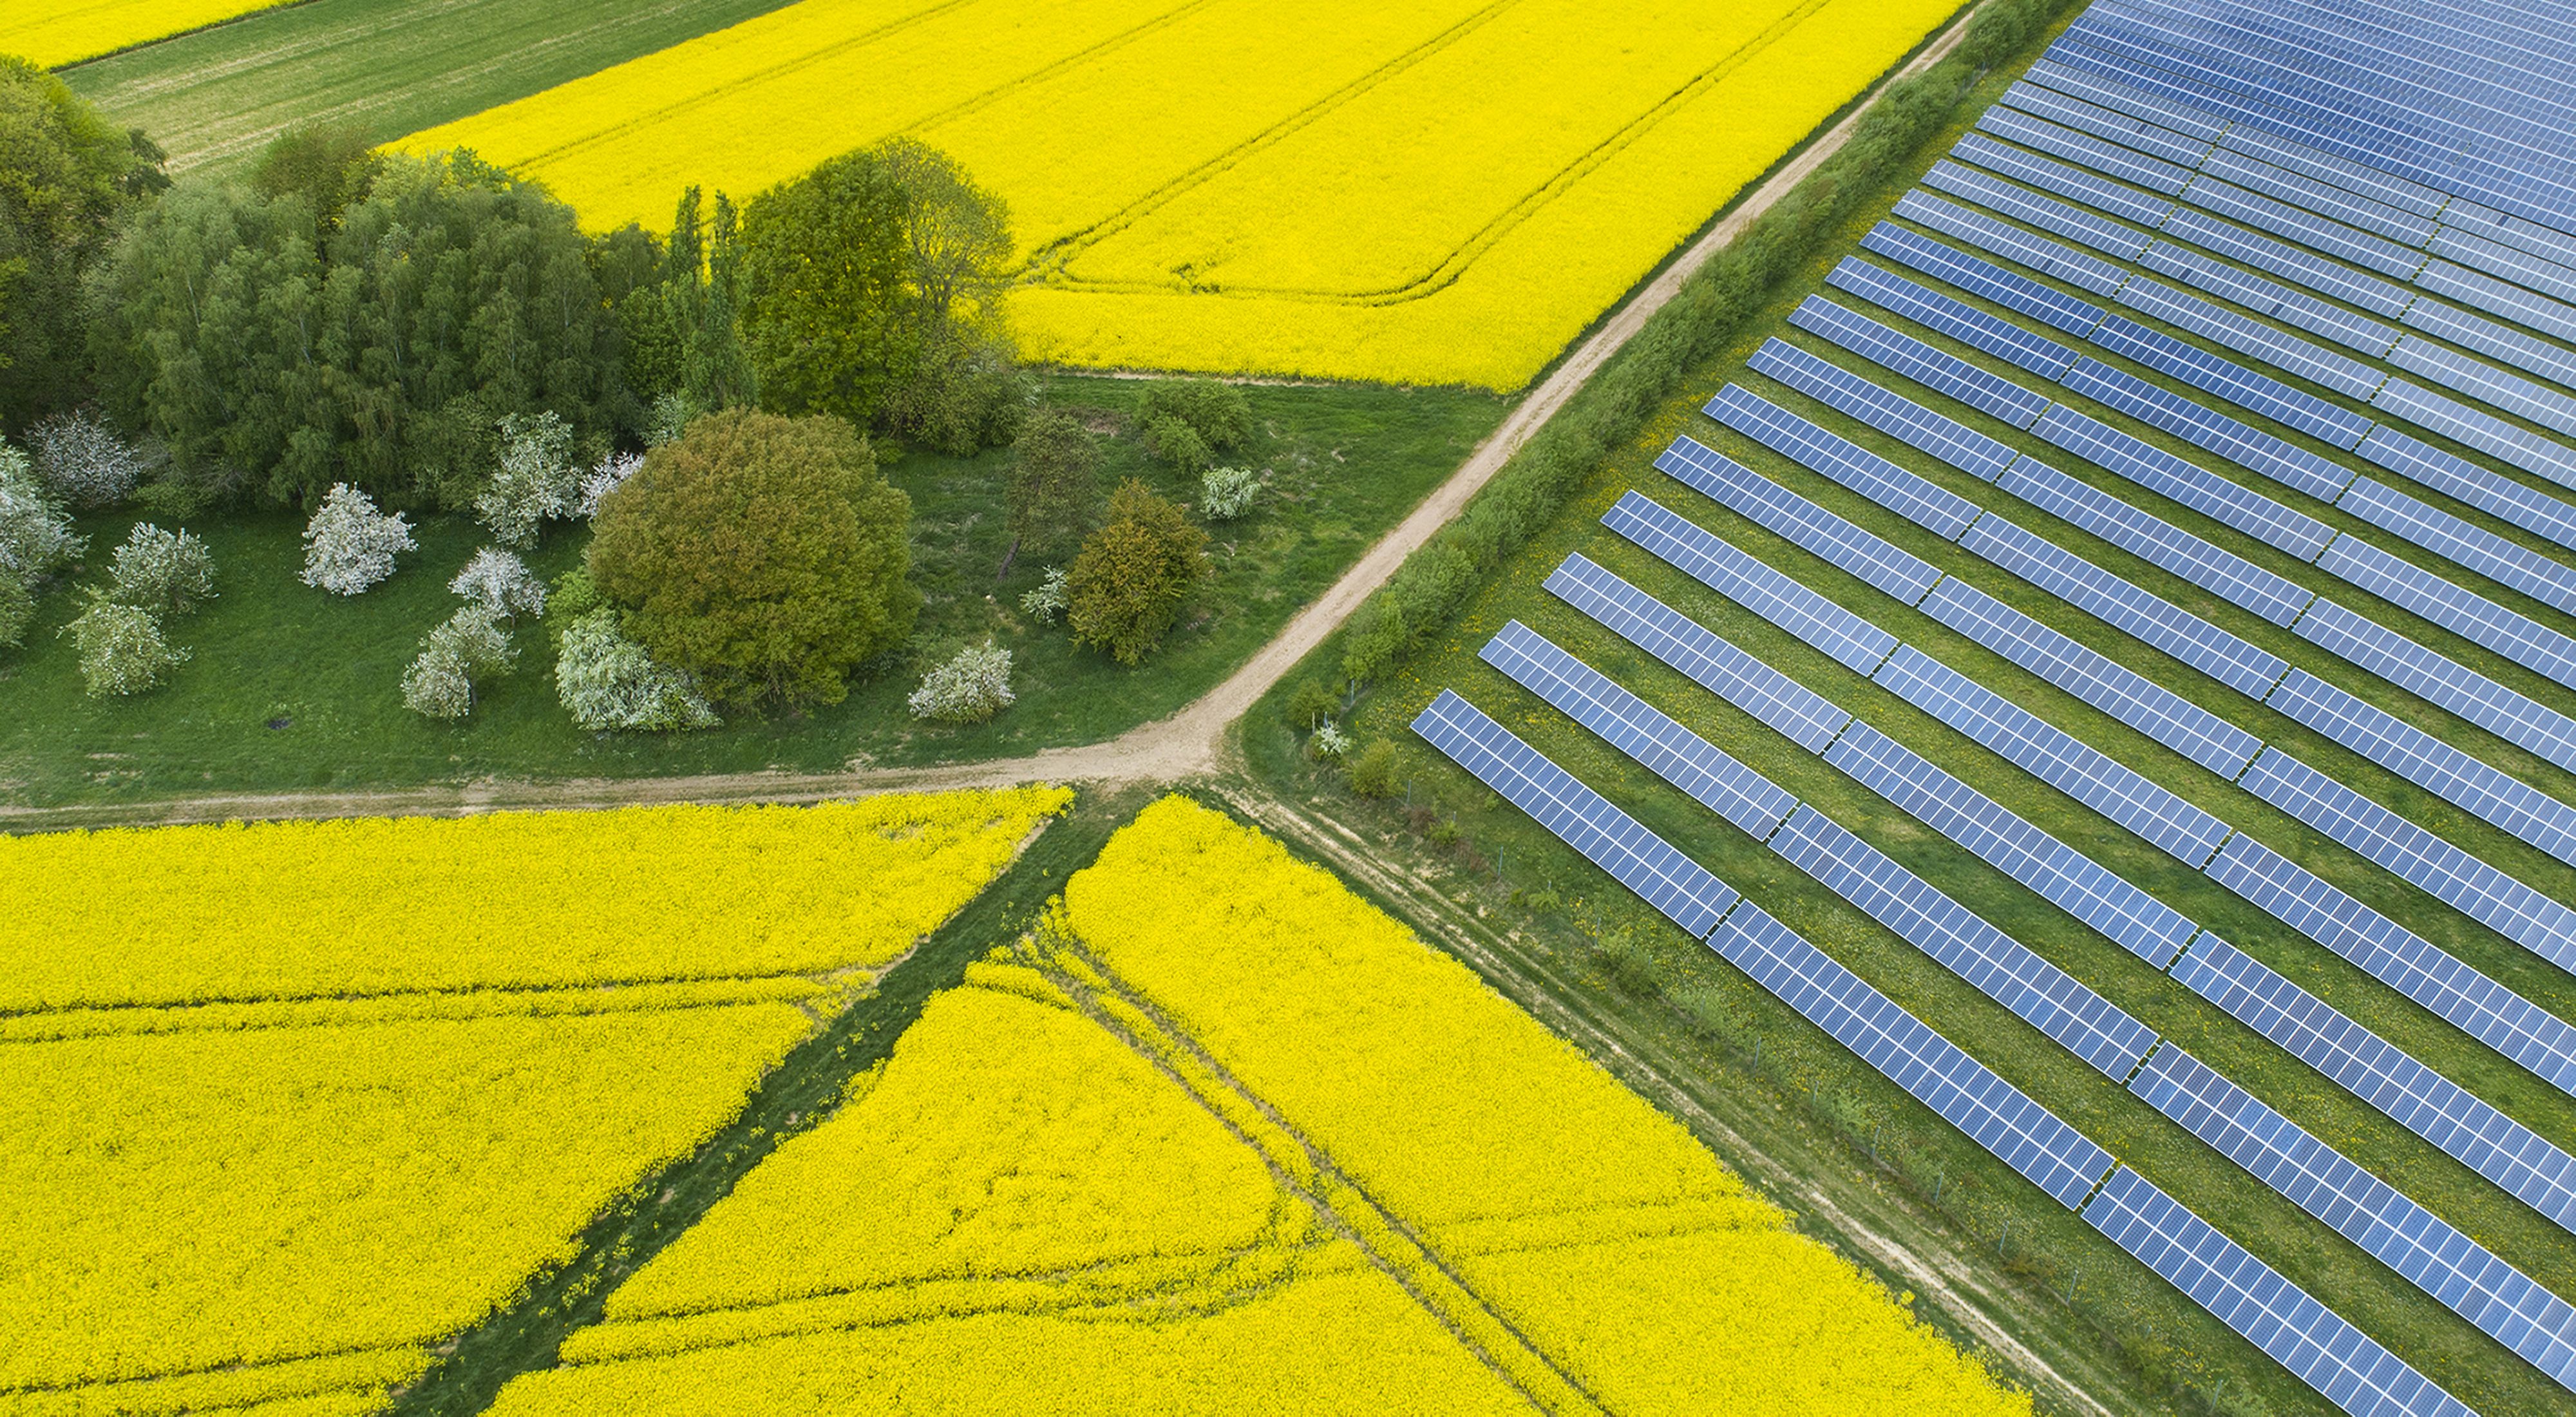 a field of solar panels adjacent to farm fields of yellow blooming canola